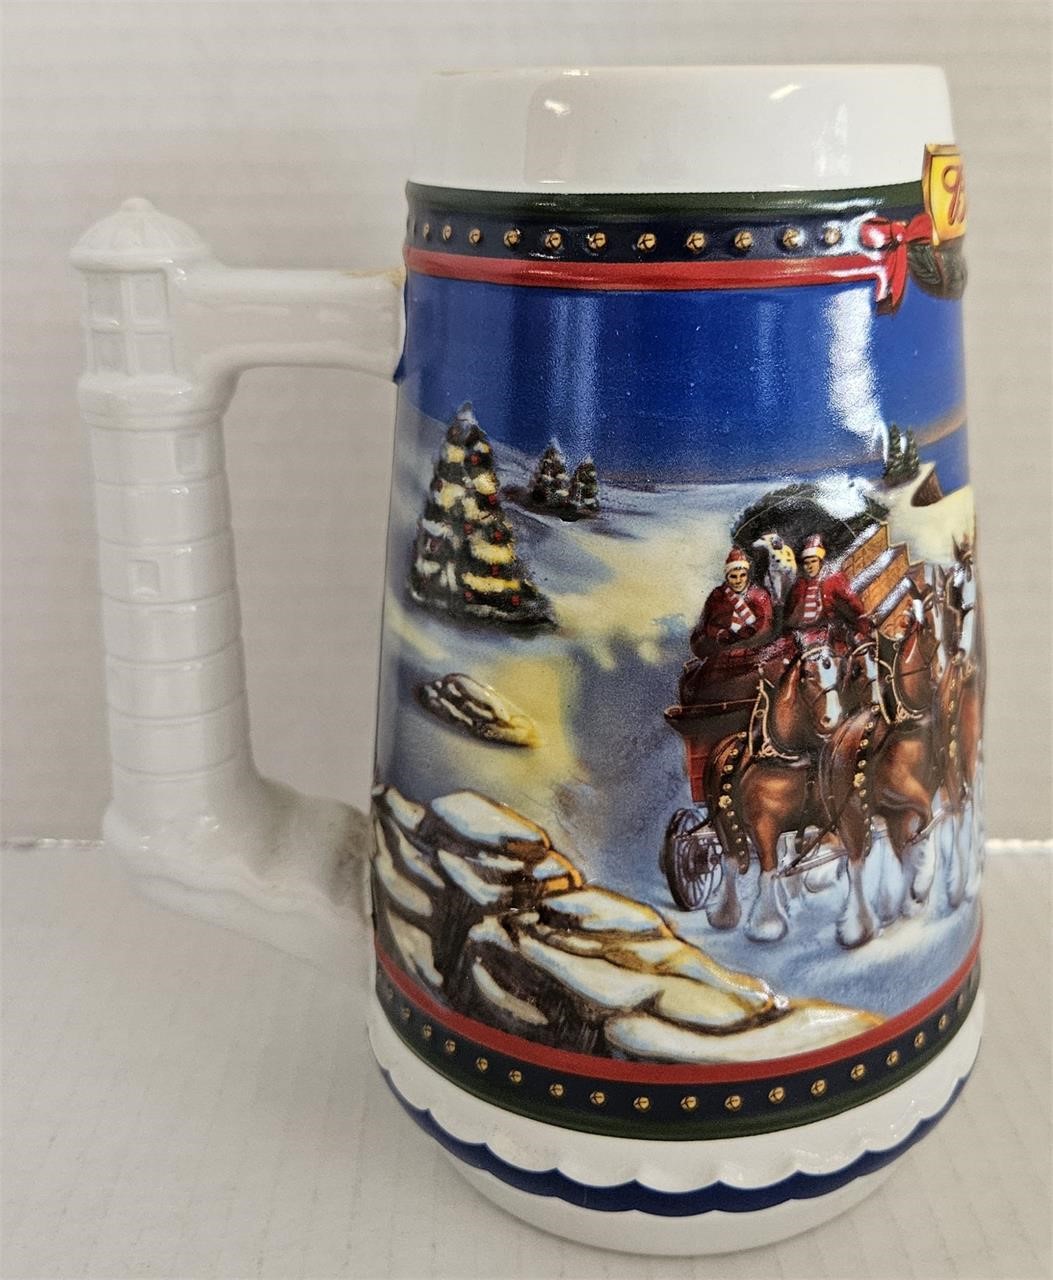 2002 Anheuser-Busch Guiding the Way Beer Stein